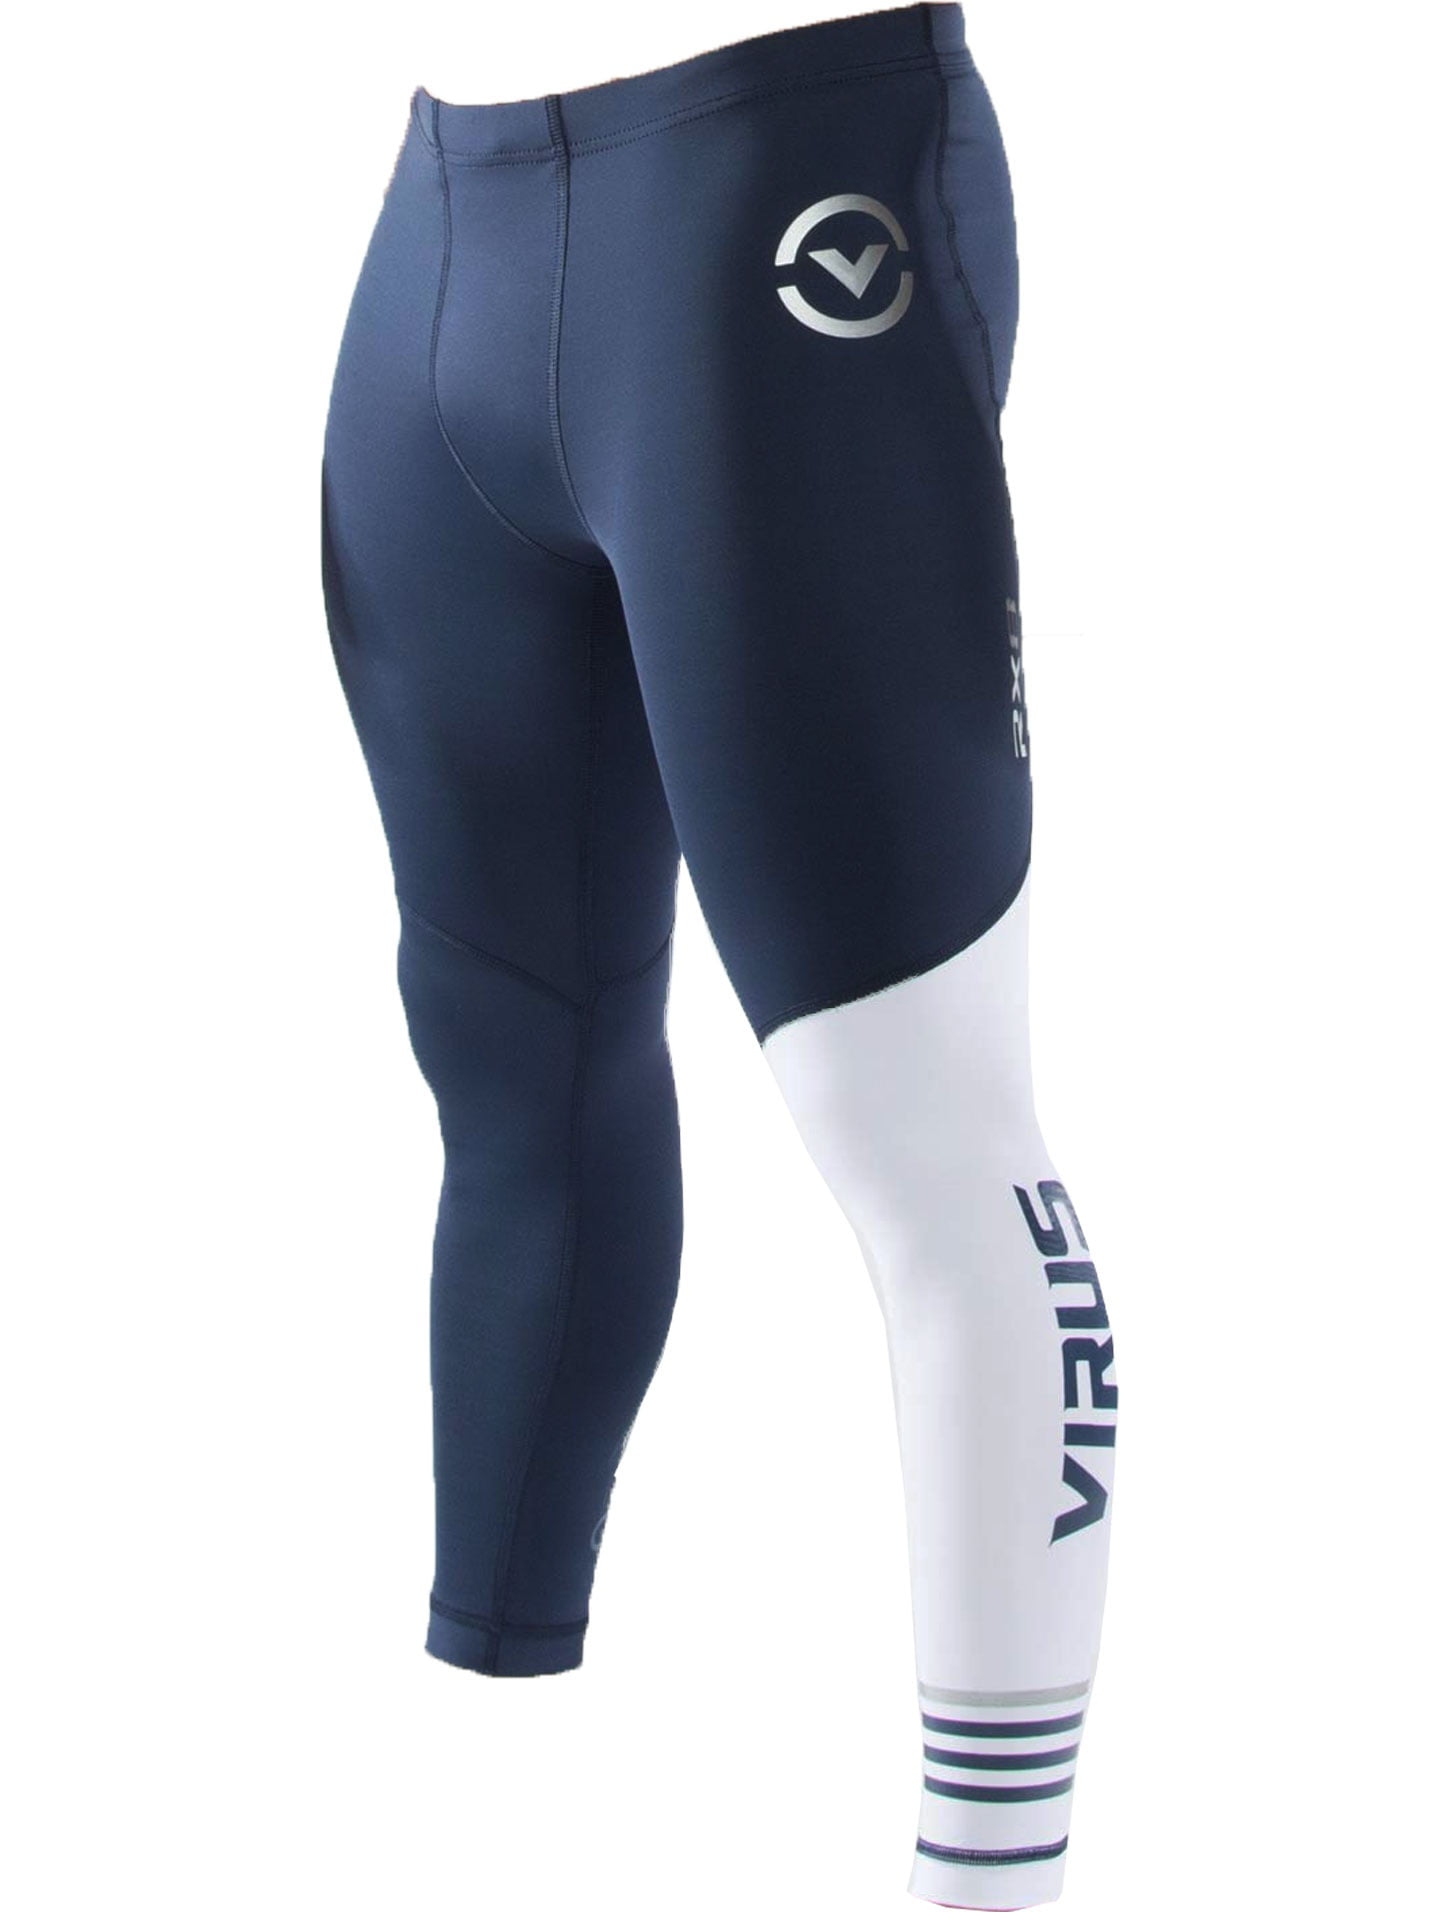 Virus Mens RX8 Say Cool Tech Compression Pants -Navy/Silver